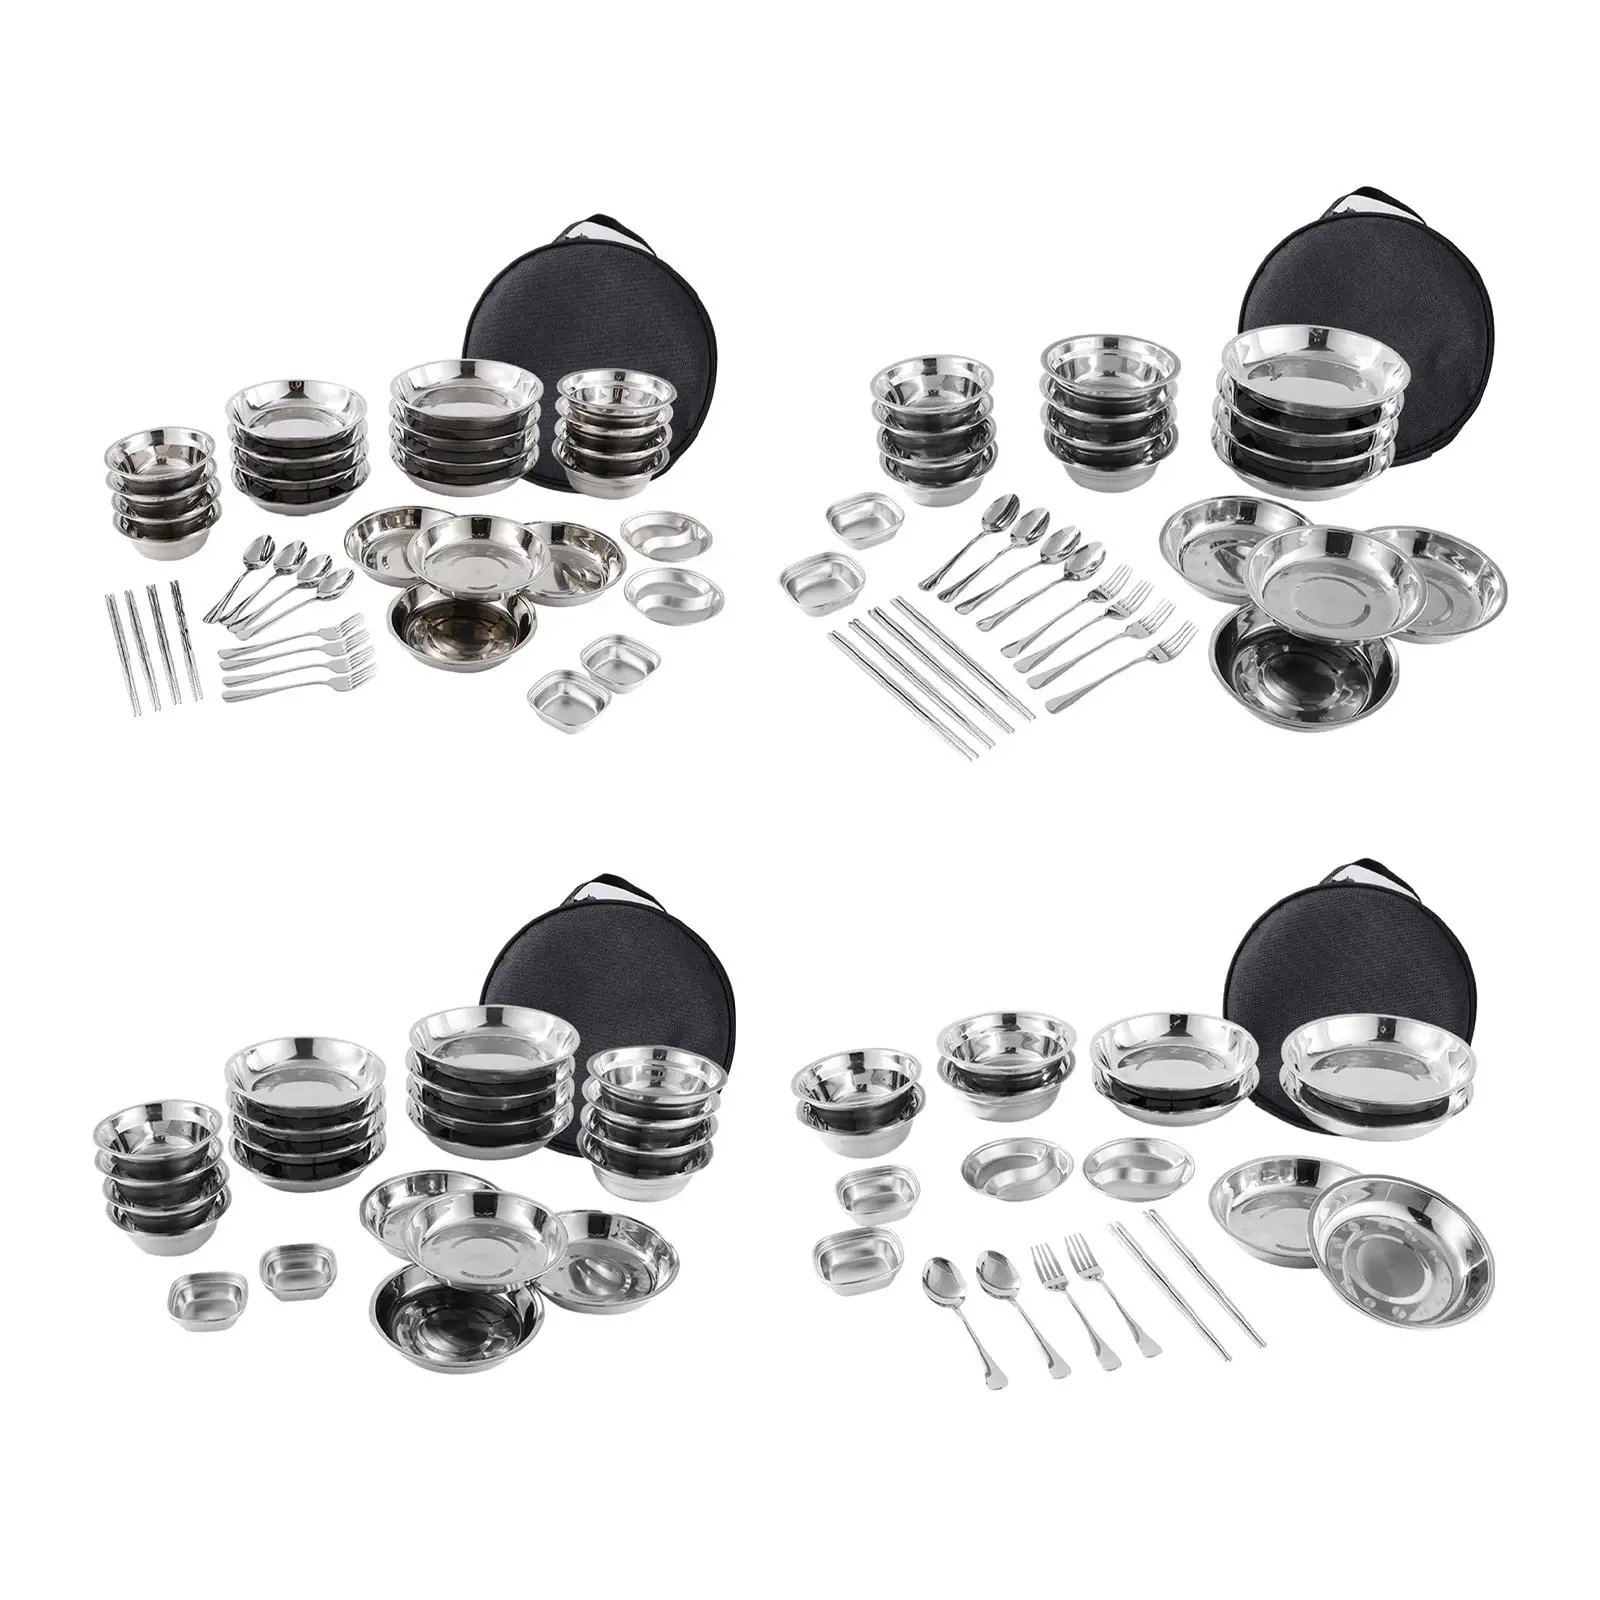 Stainless Steel Plates and Bowls Camping Cutlery Set Dishes Tableware with